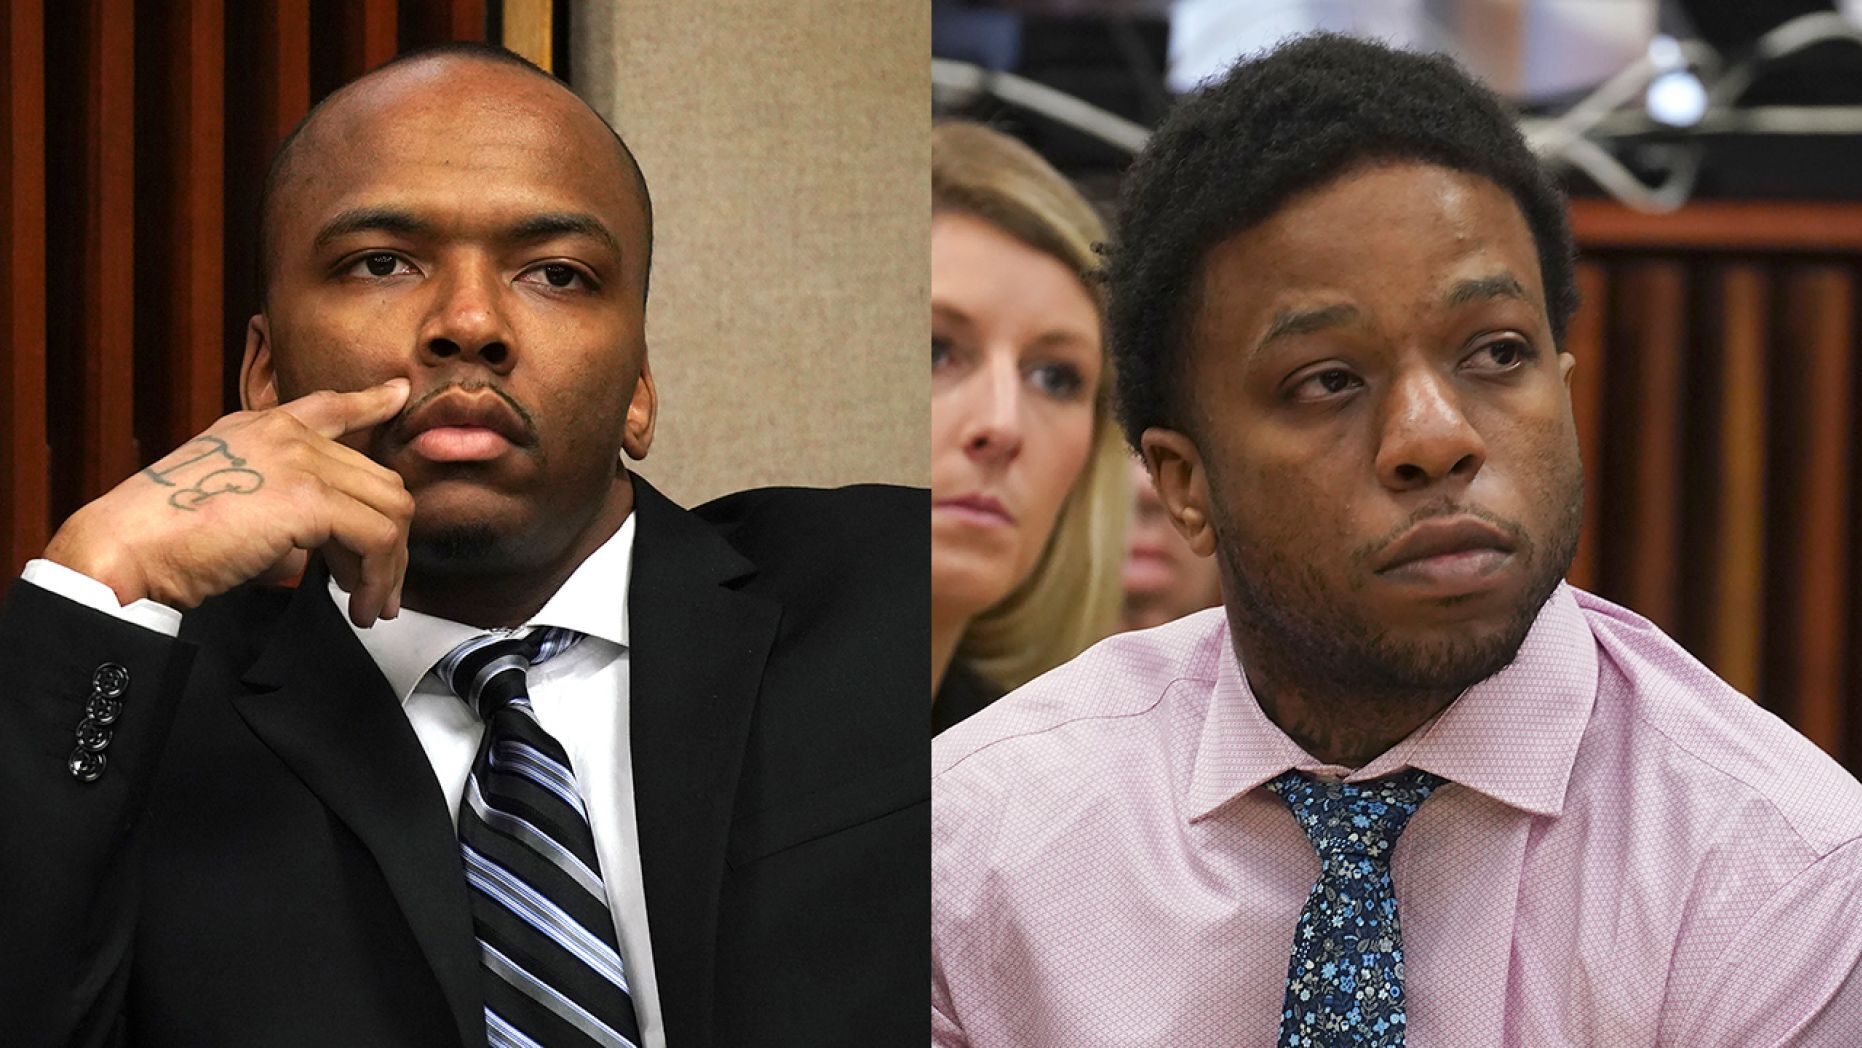 From left to right: Dwright Doty and Corey Morgan appear during opening statements in each of their separate trials 